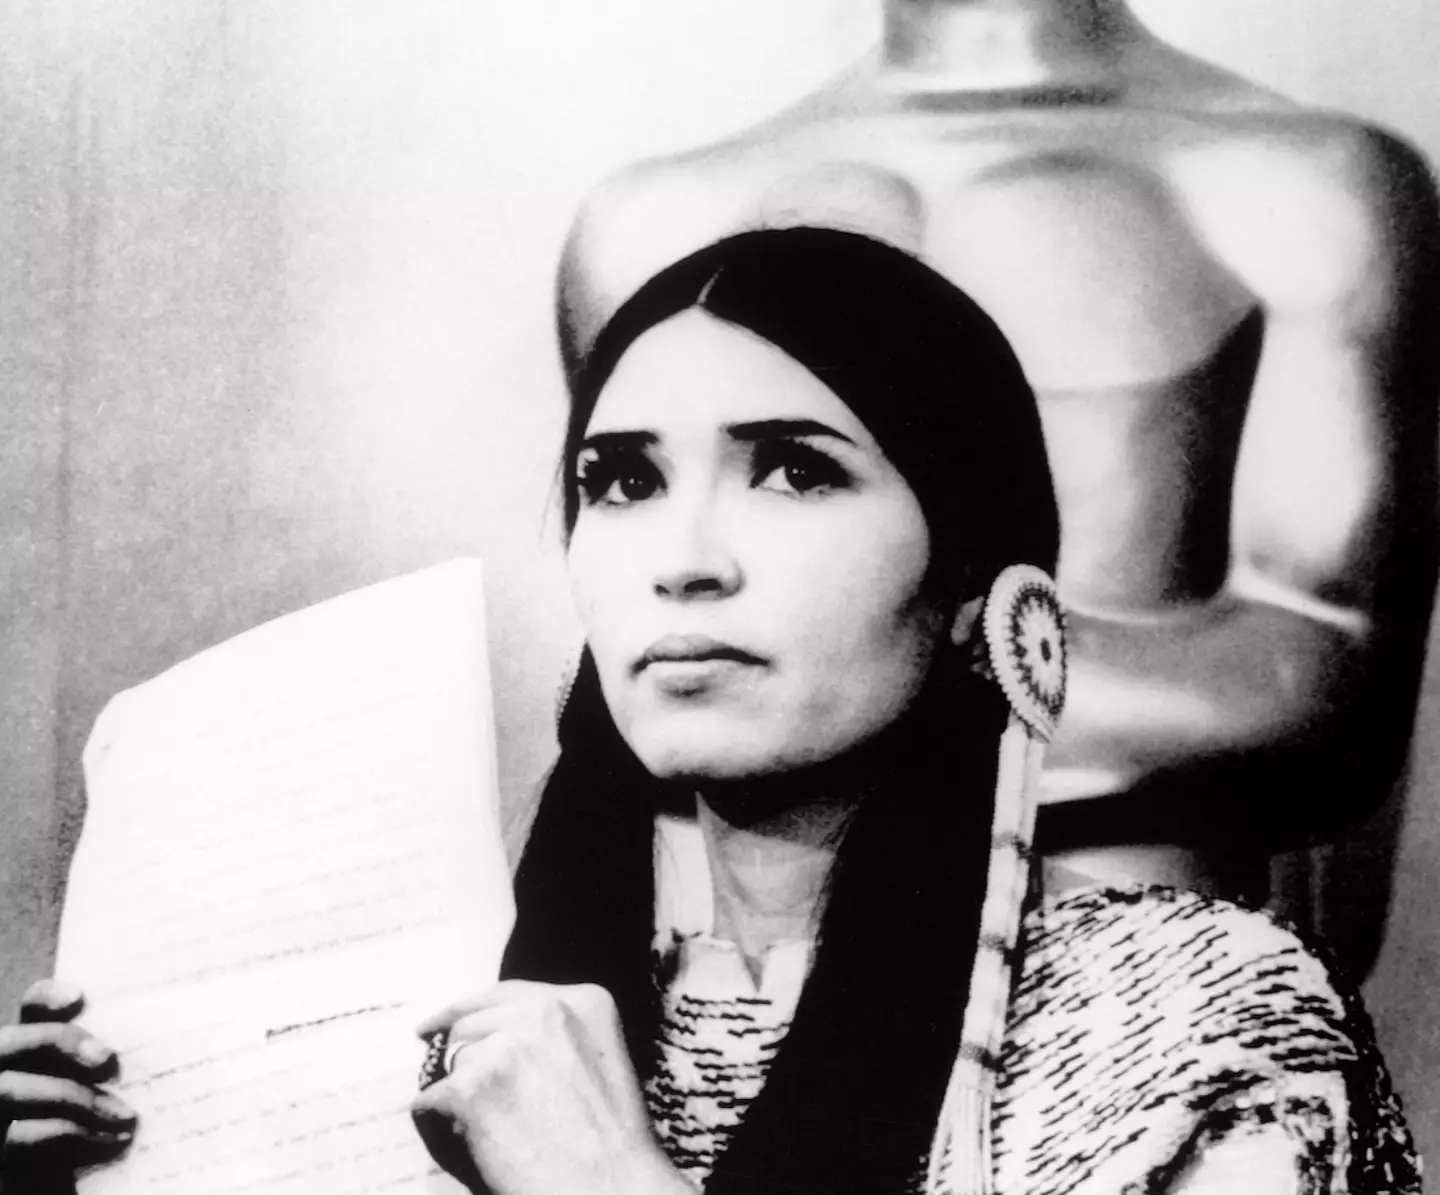 Littlefeather was booed when she appeared on stage.